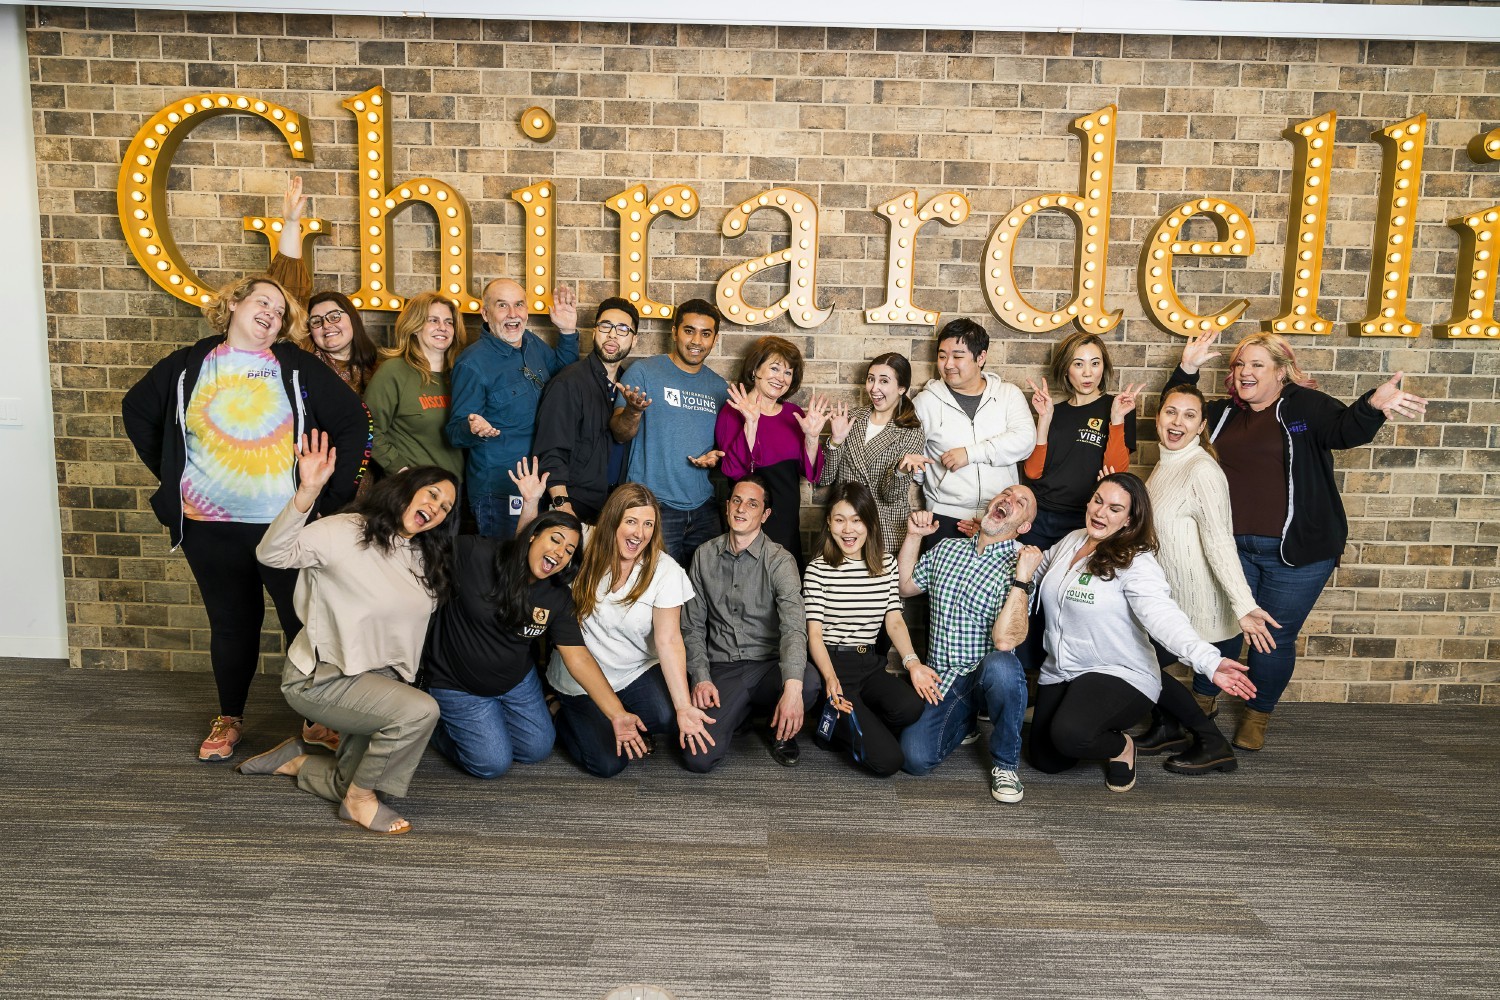 Our ERGs make life a bite better at Ghirardelli by promoting and celebrating diversity, equity and inclusion.